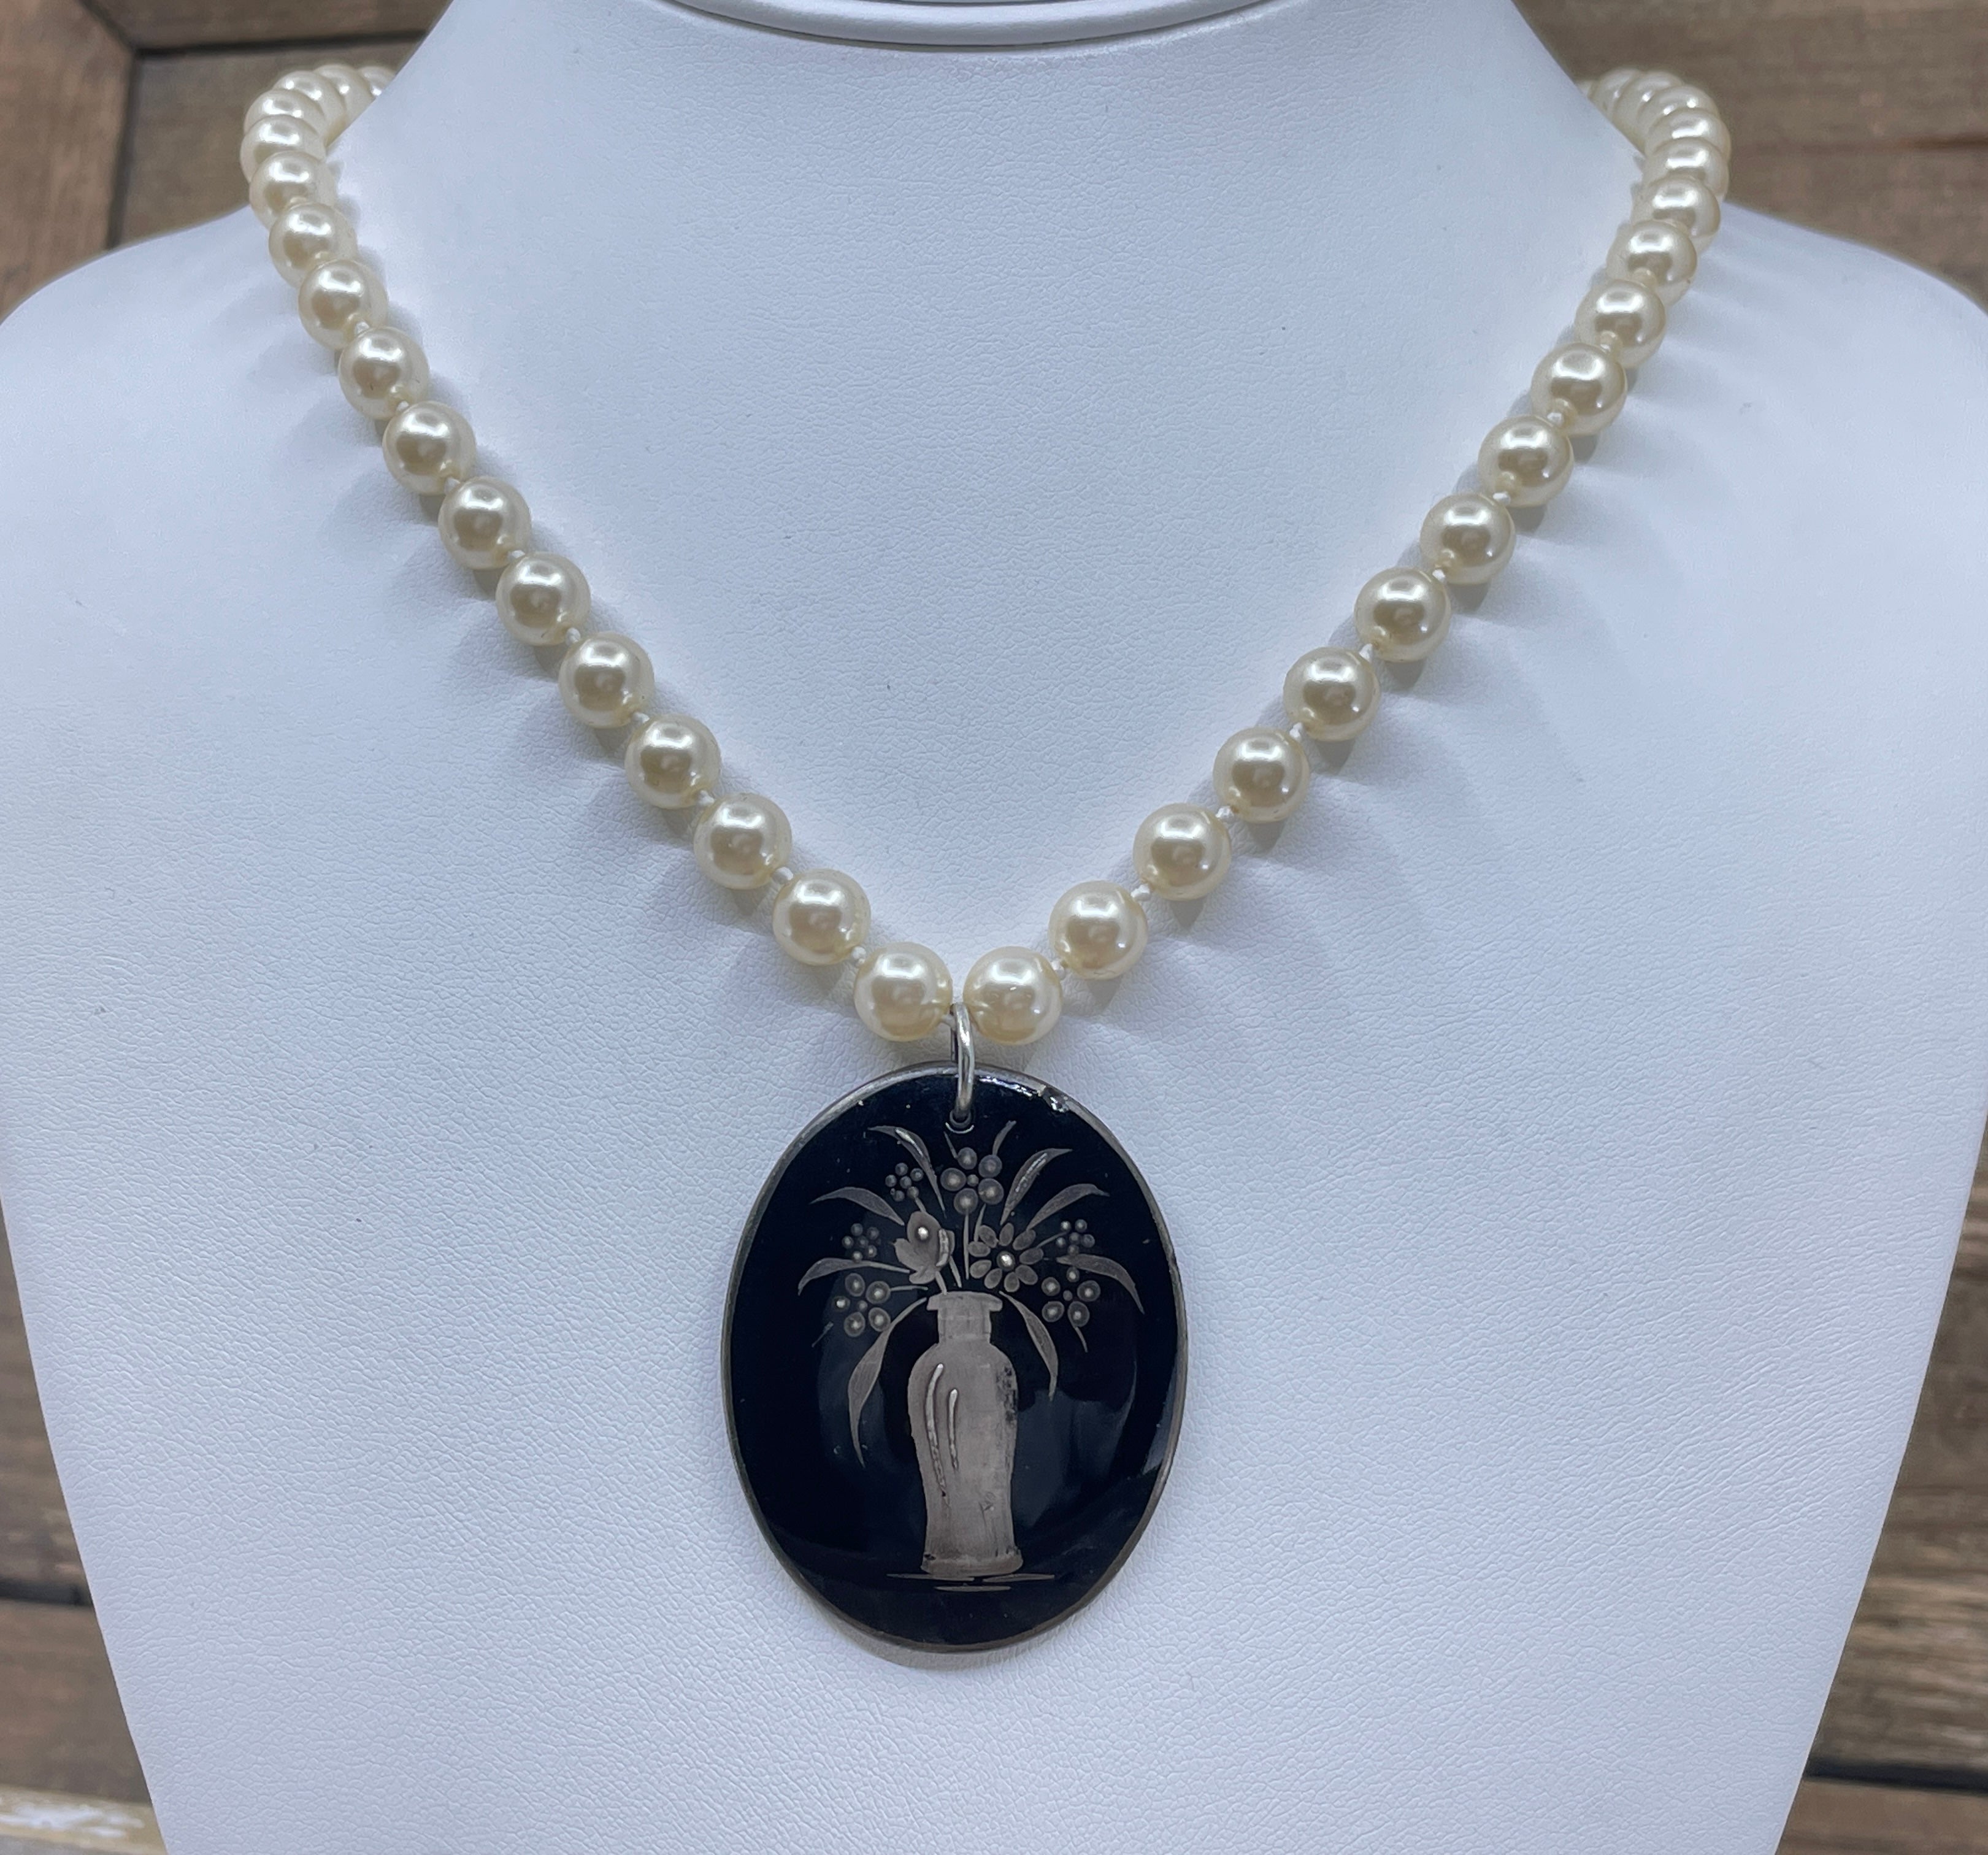 Vintage Pearls with Vintage Czech Glass Pendant